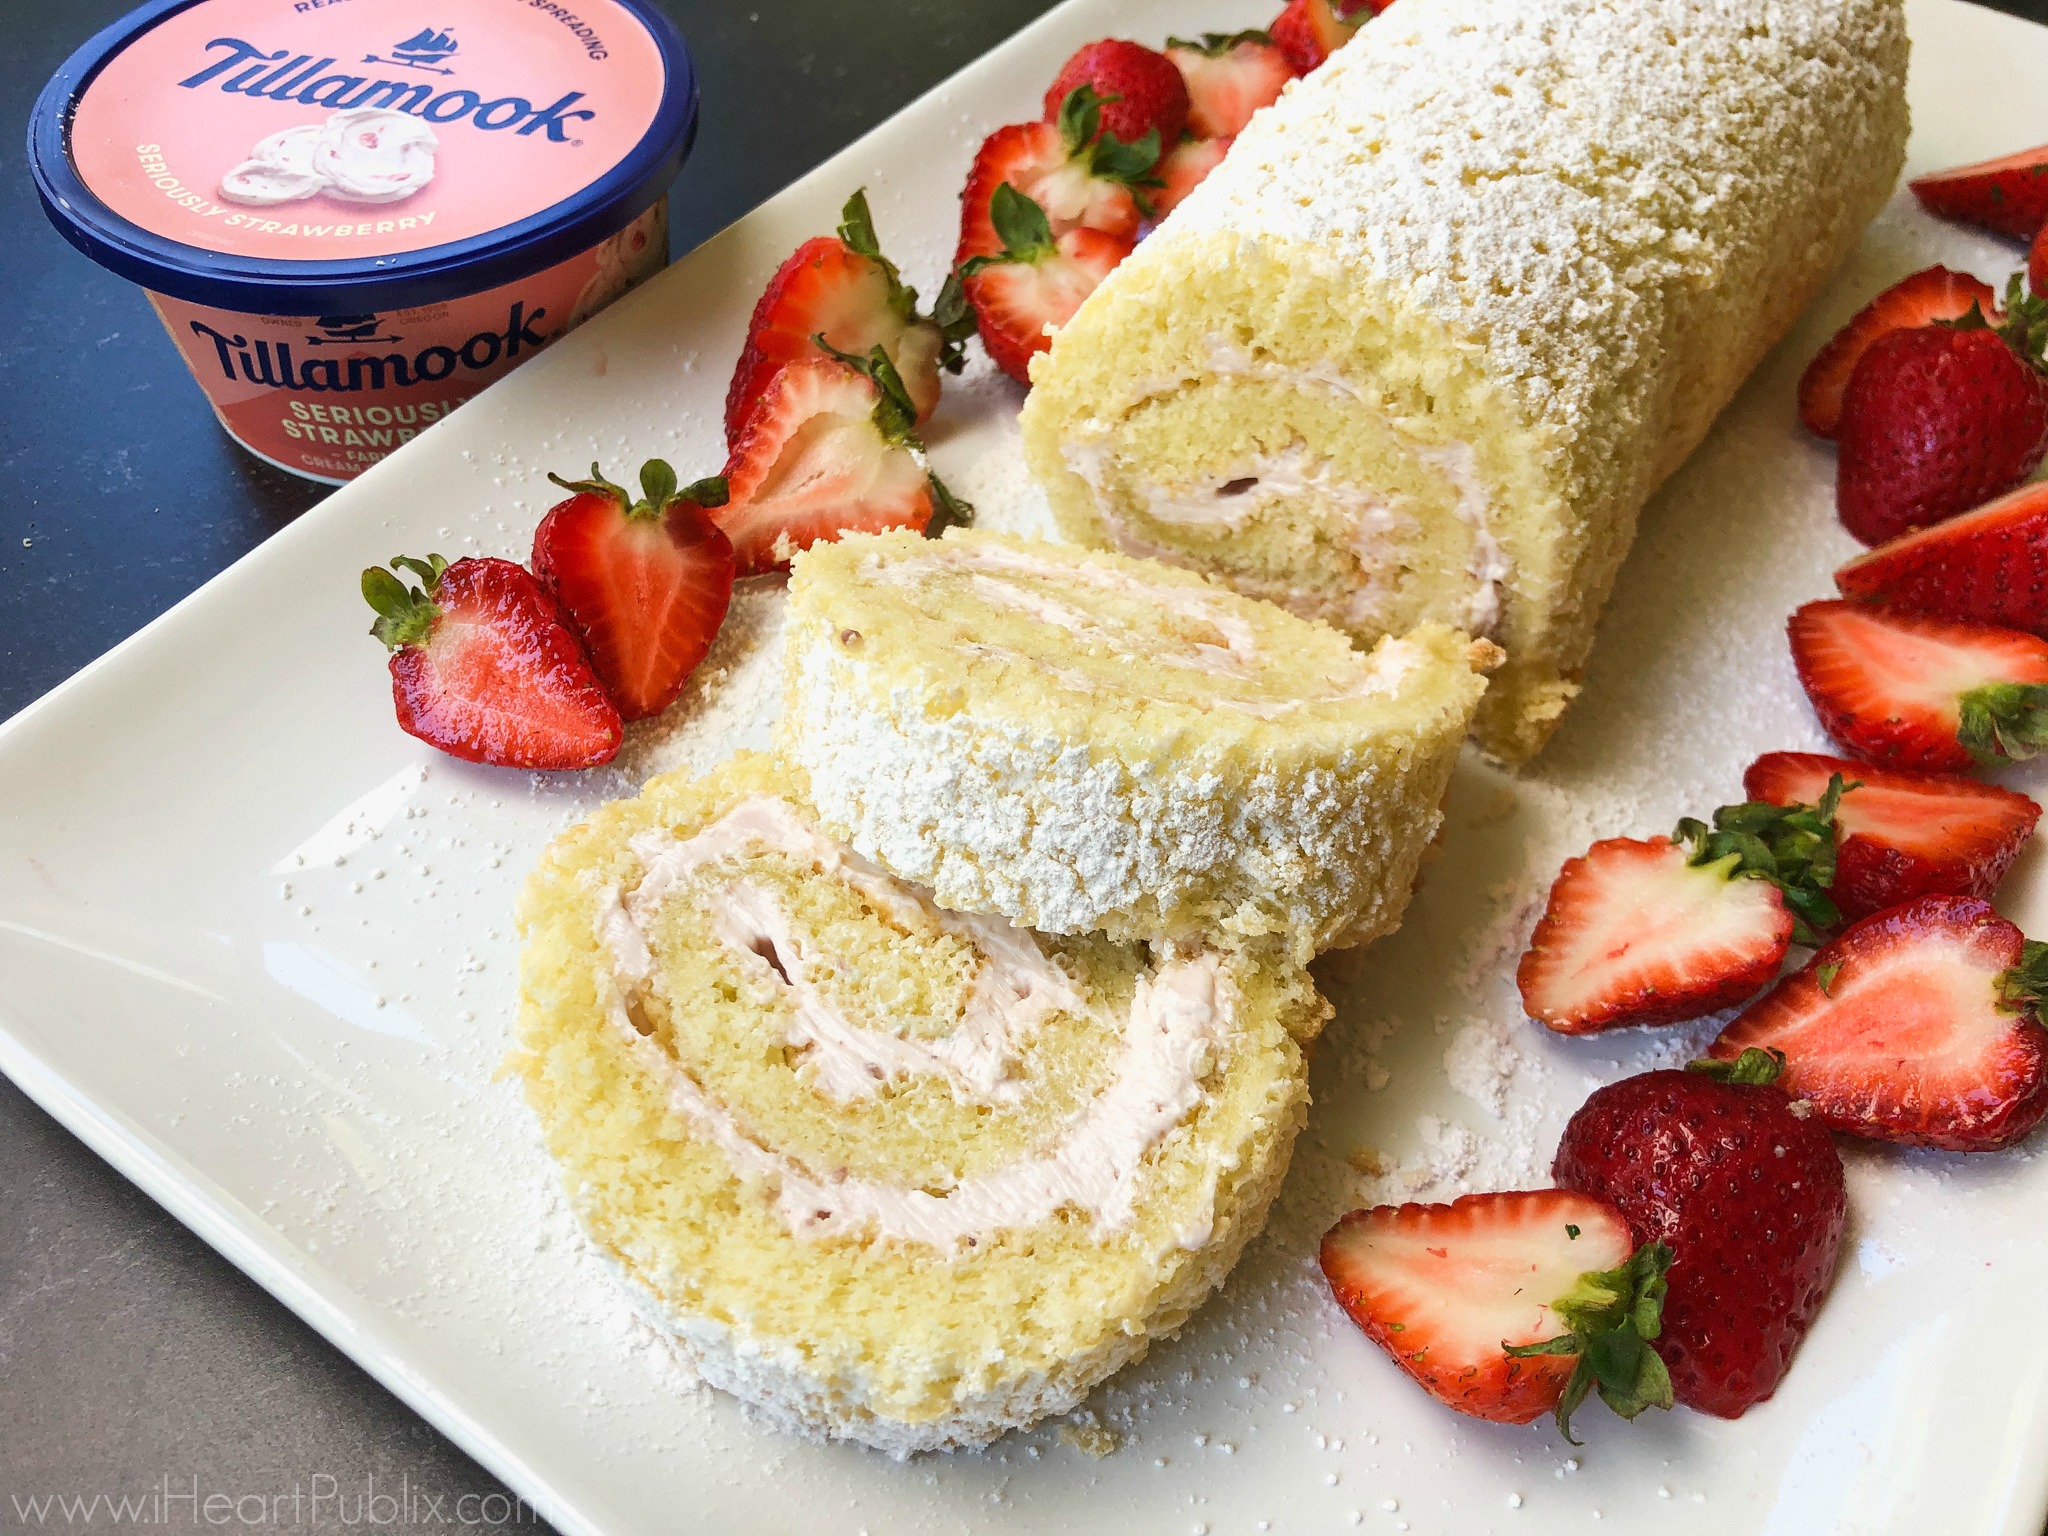 Seriously Strawberry Cheesecake Cake Roll - Tasty Dessert Made With Tillamook Cream Cheese (Save Now At Publix) on I Heart Publix